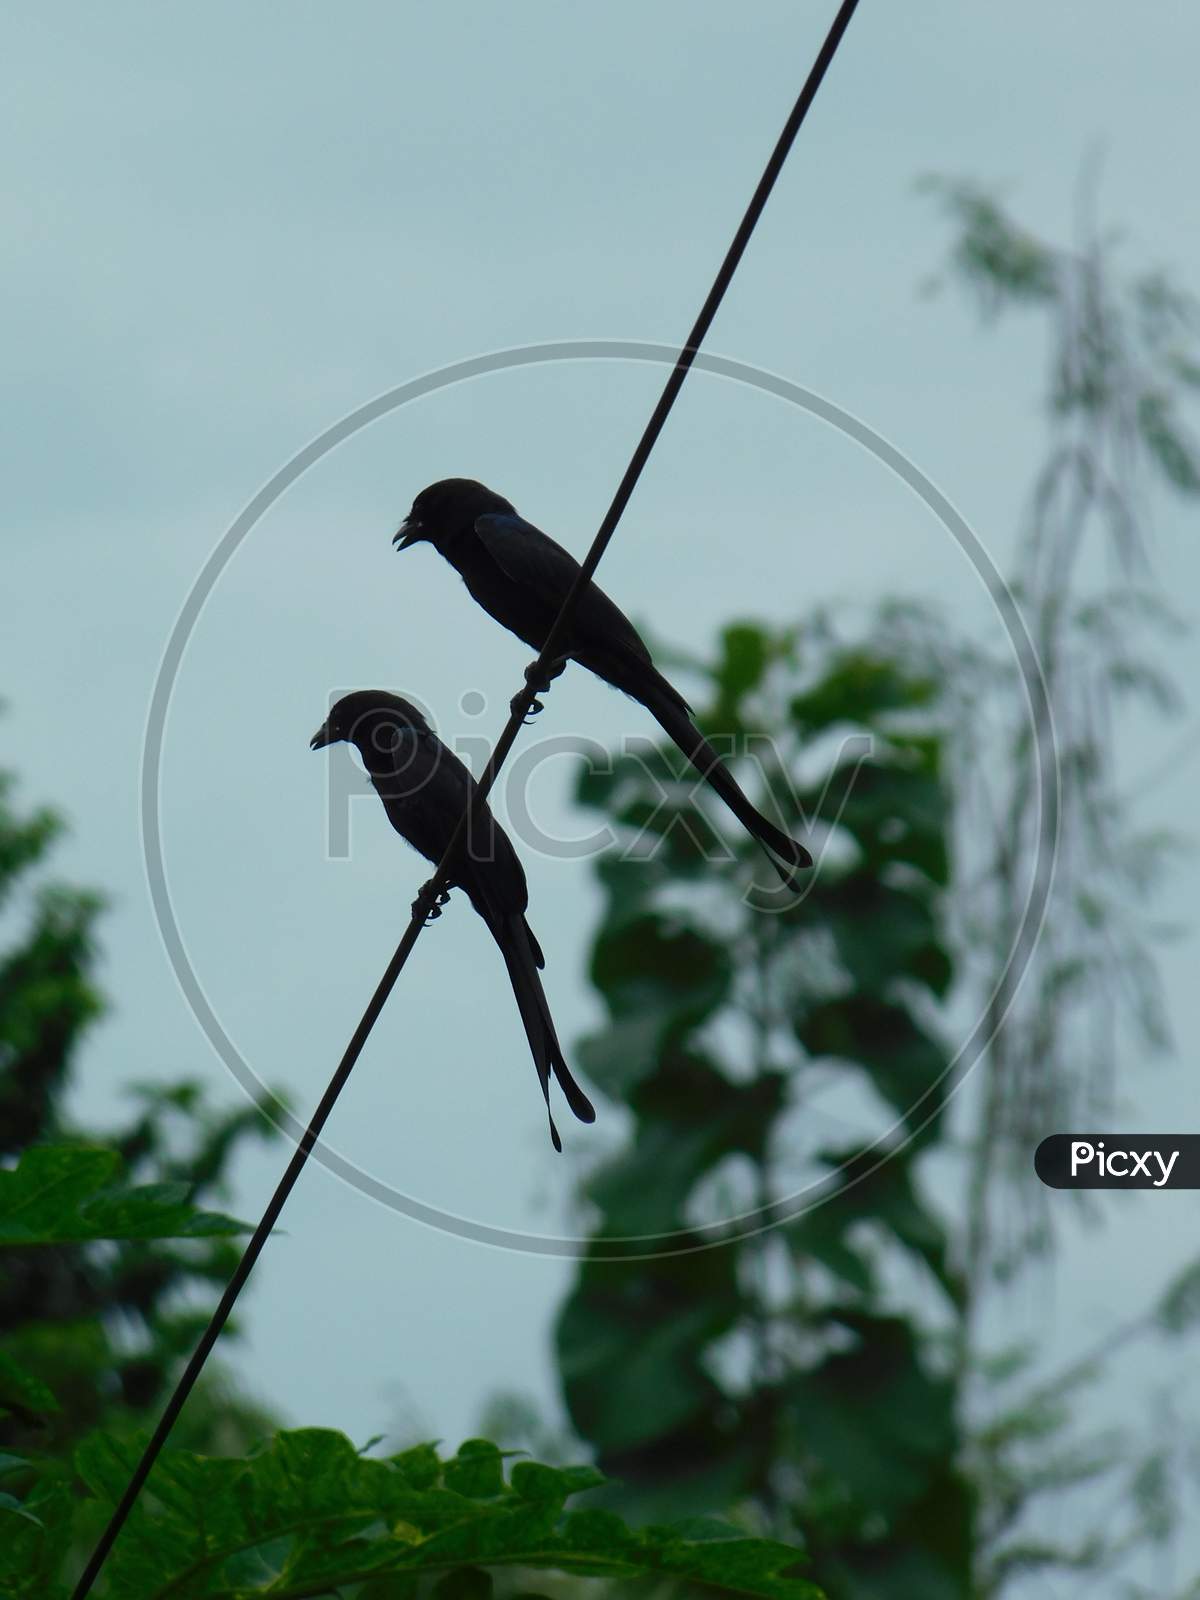 Couple of Black drongo sitting on the wire.